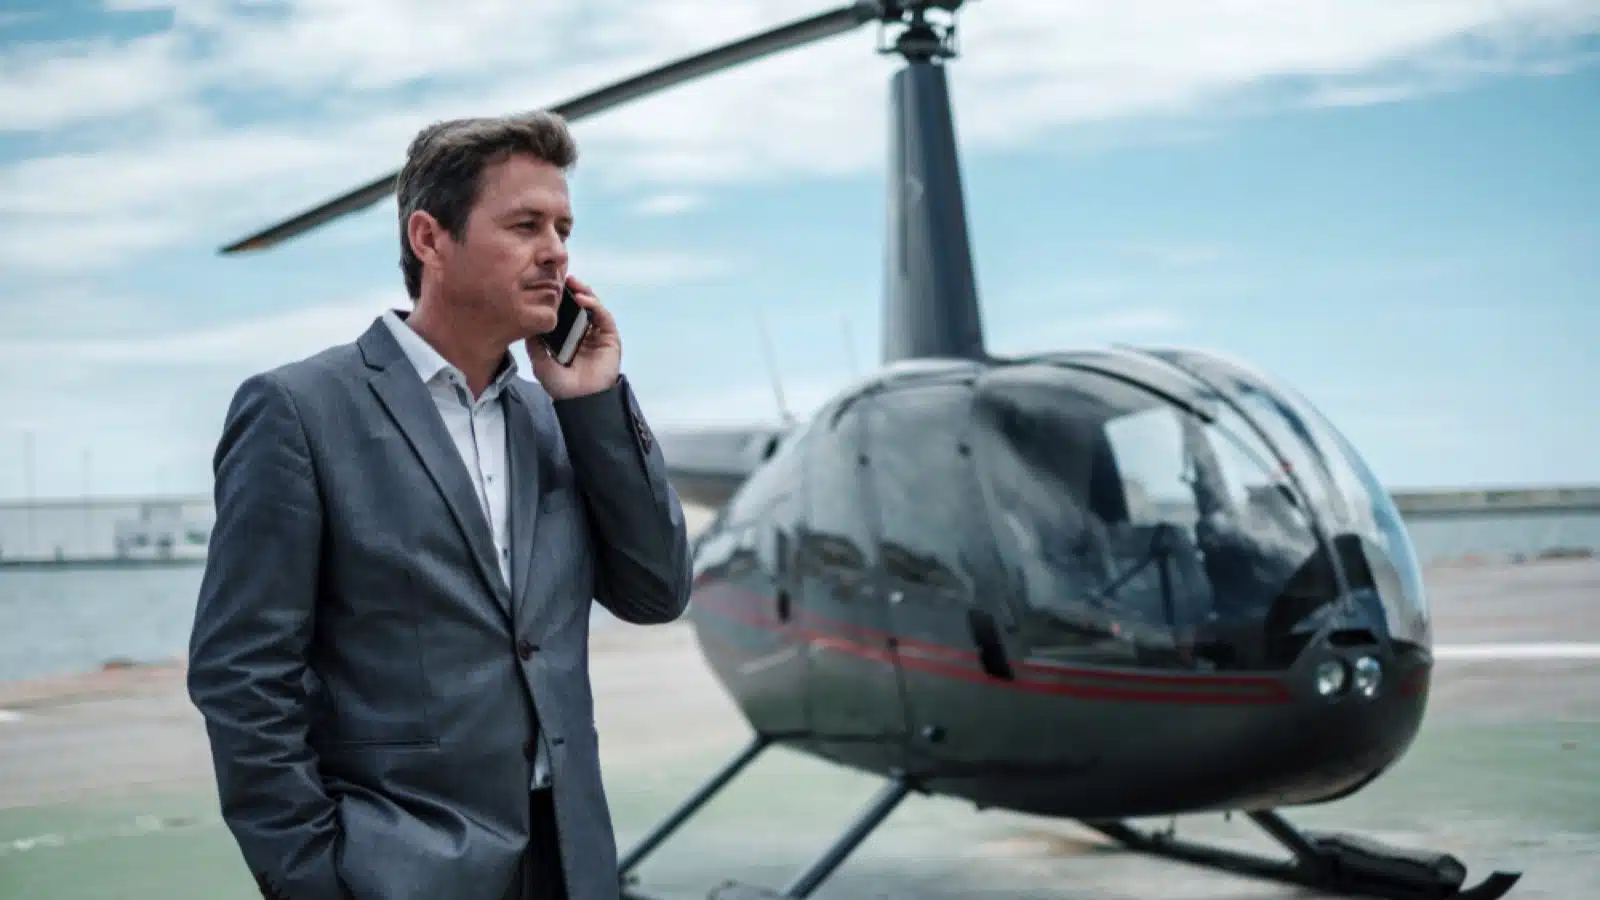 Businessman near helicopter